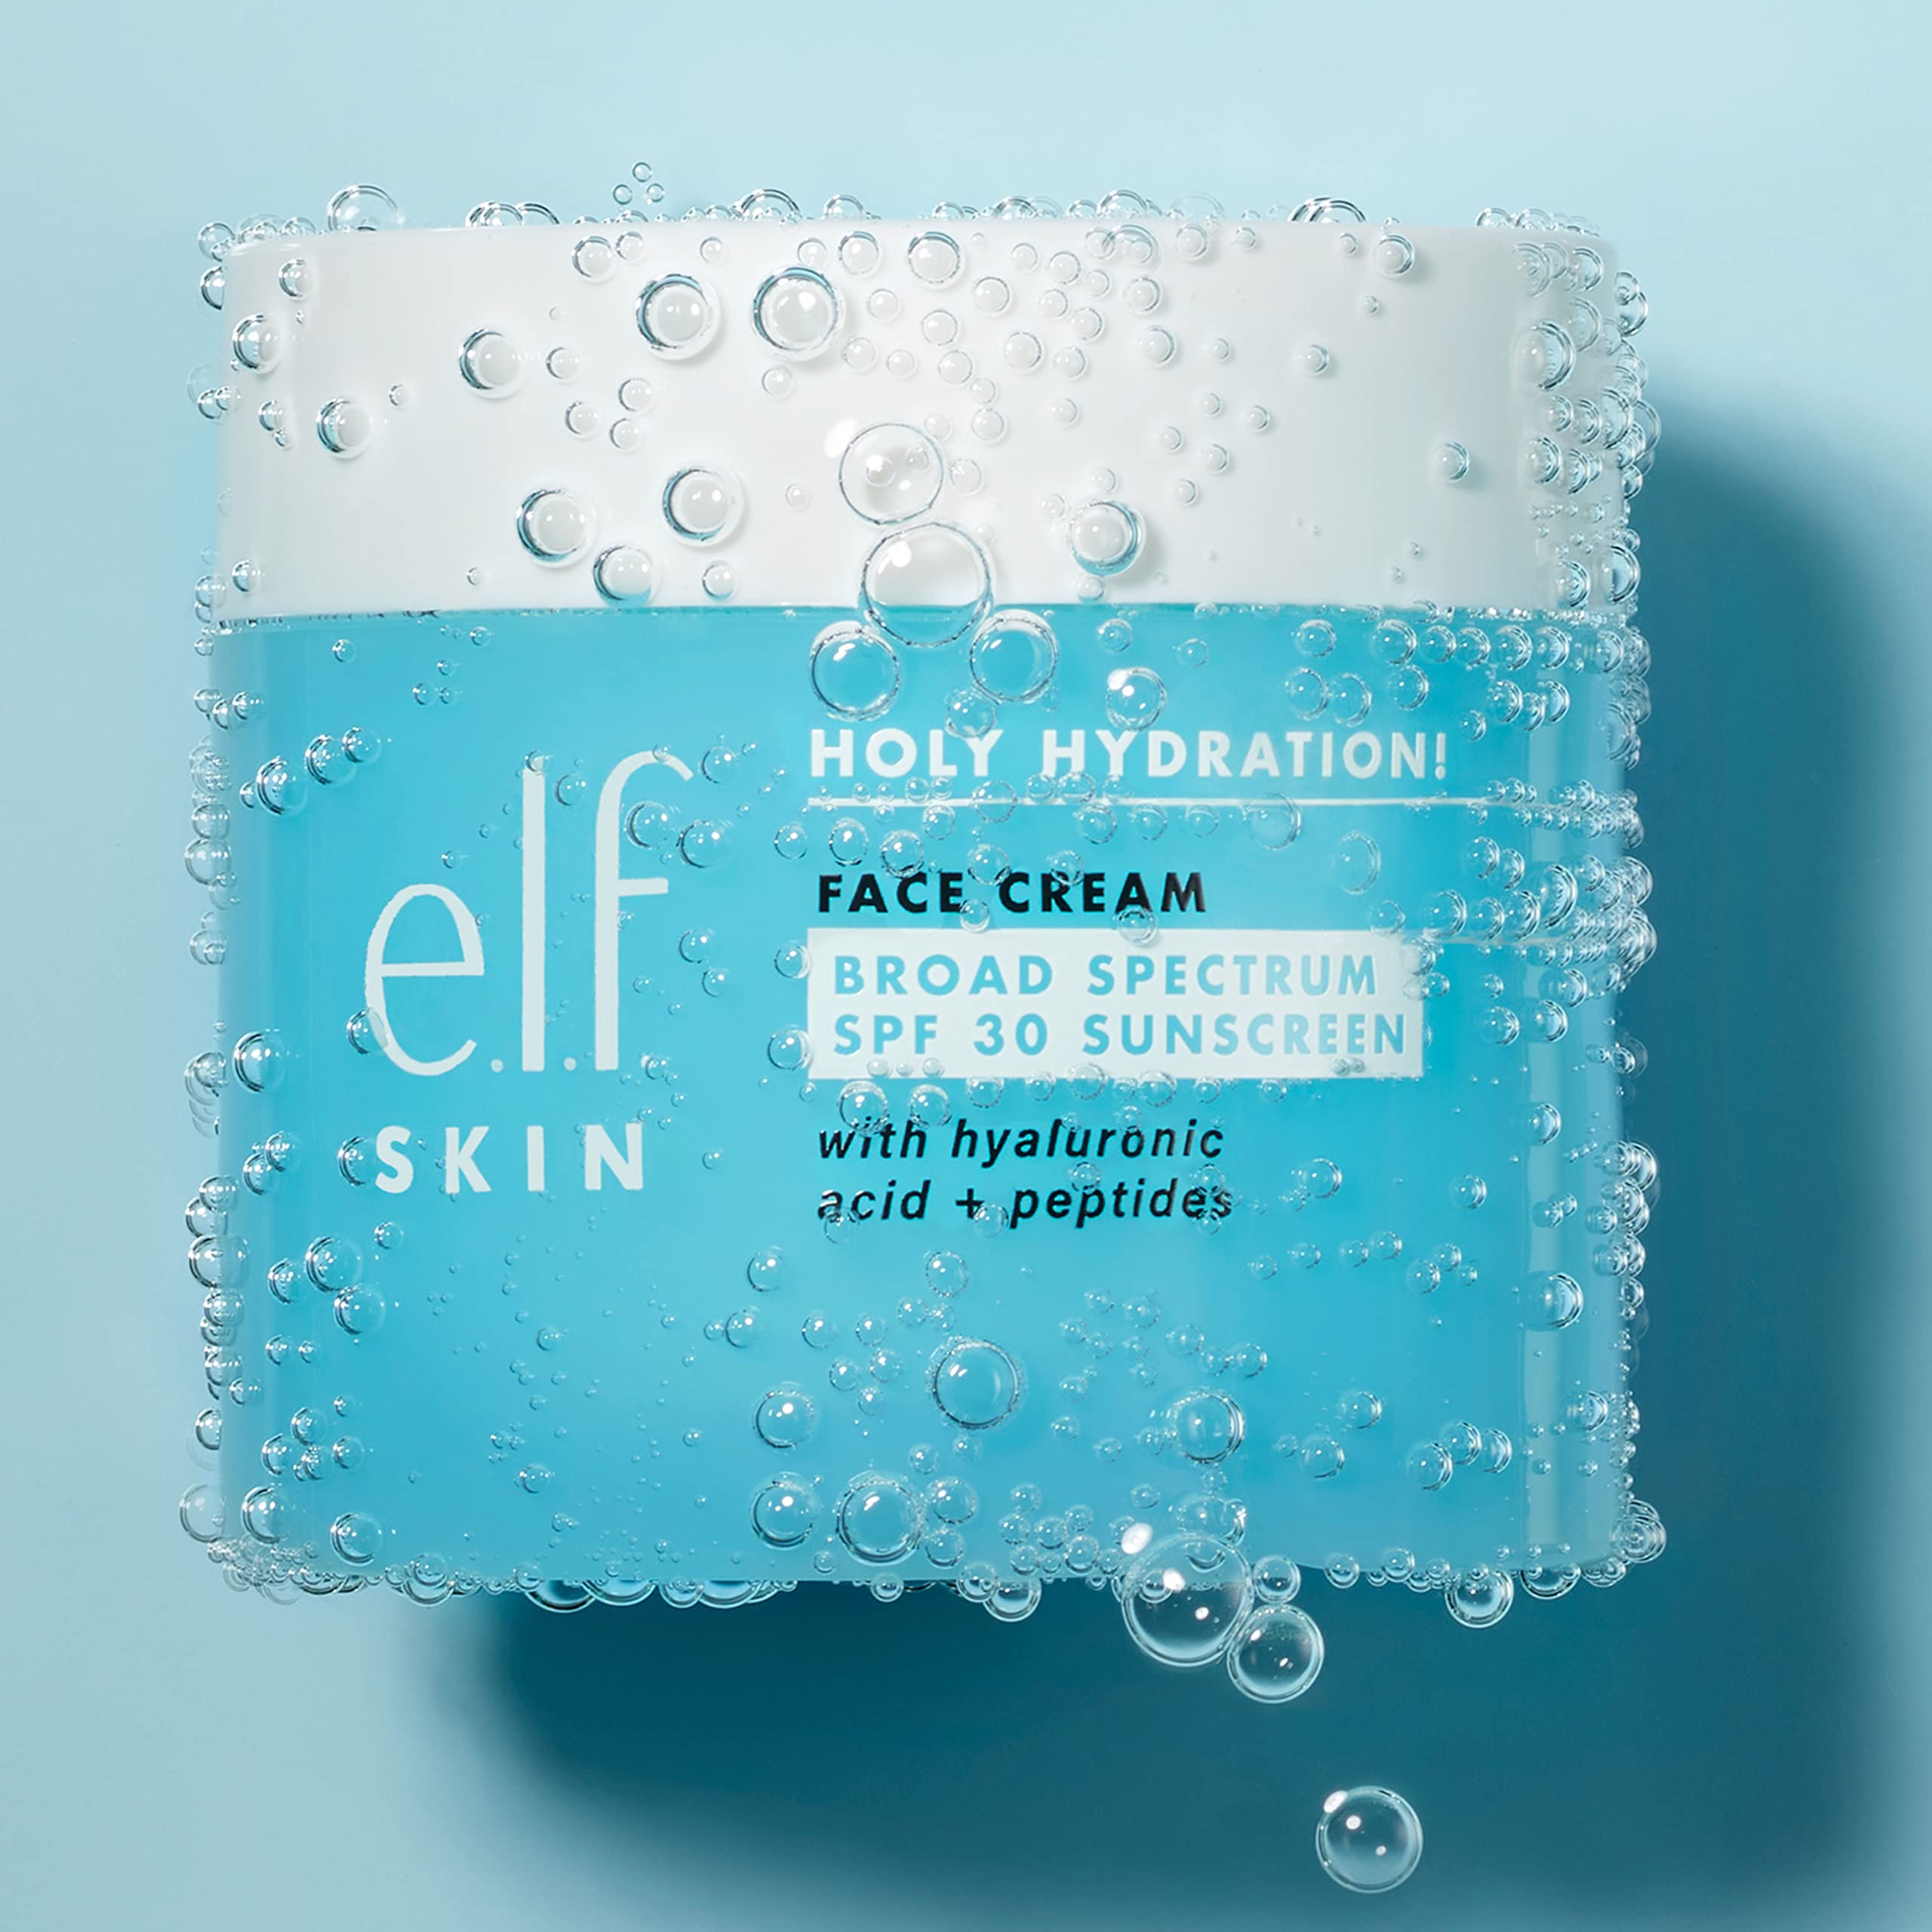 e.l.f. Holy Hydration! Face Cream - Broad Spectrum SPF 30 Sunscreen, Moisturizes & Softens Skin, Quick-Absorbing & Ultra-Hydrating, 1.8 Oz (50g)